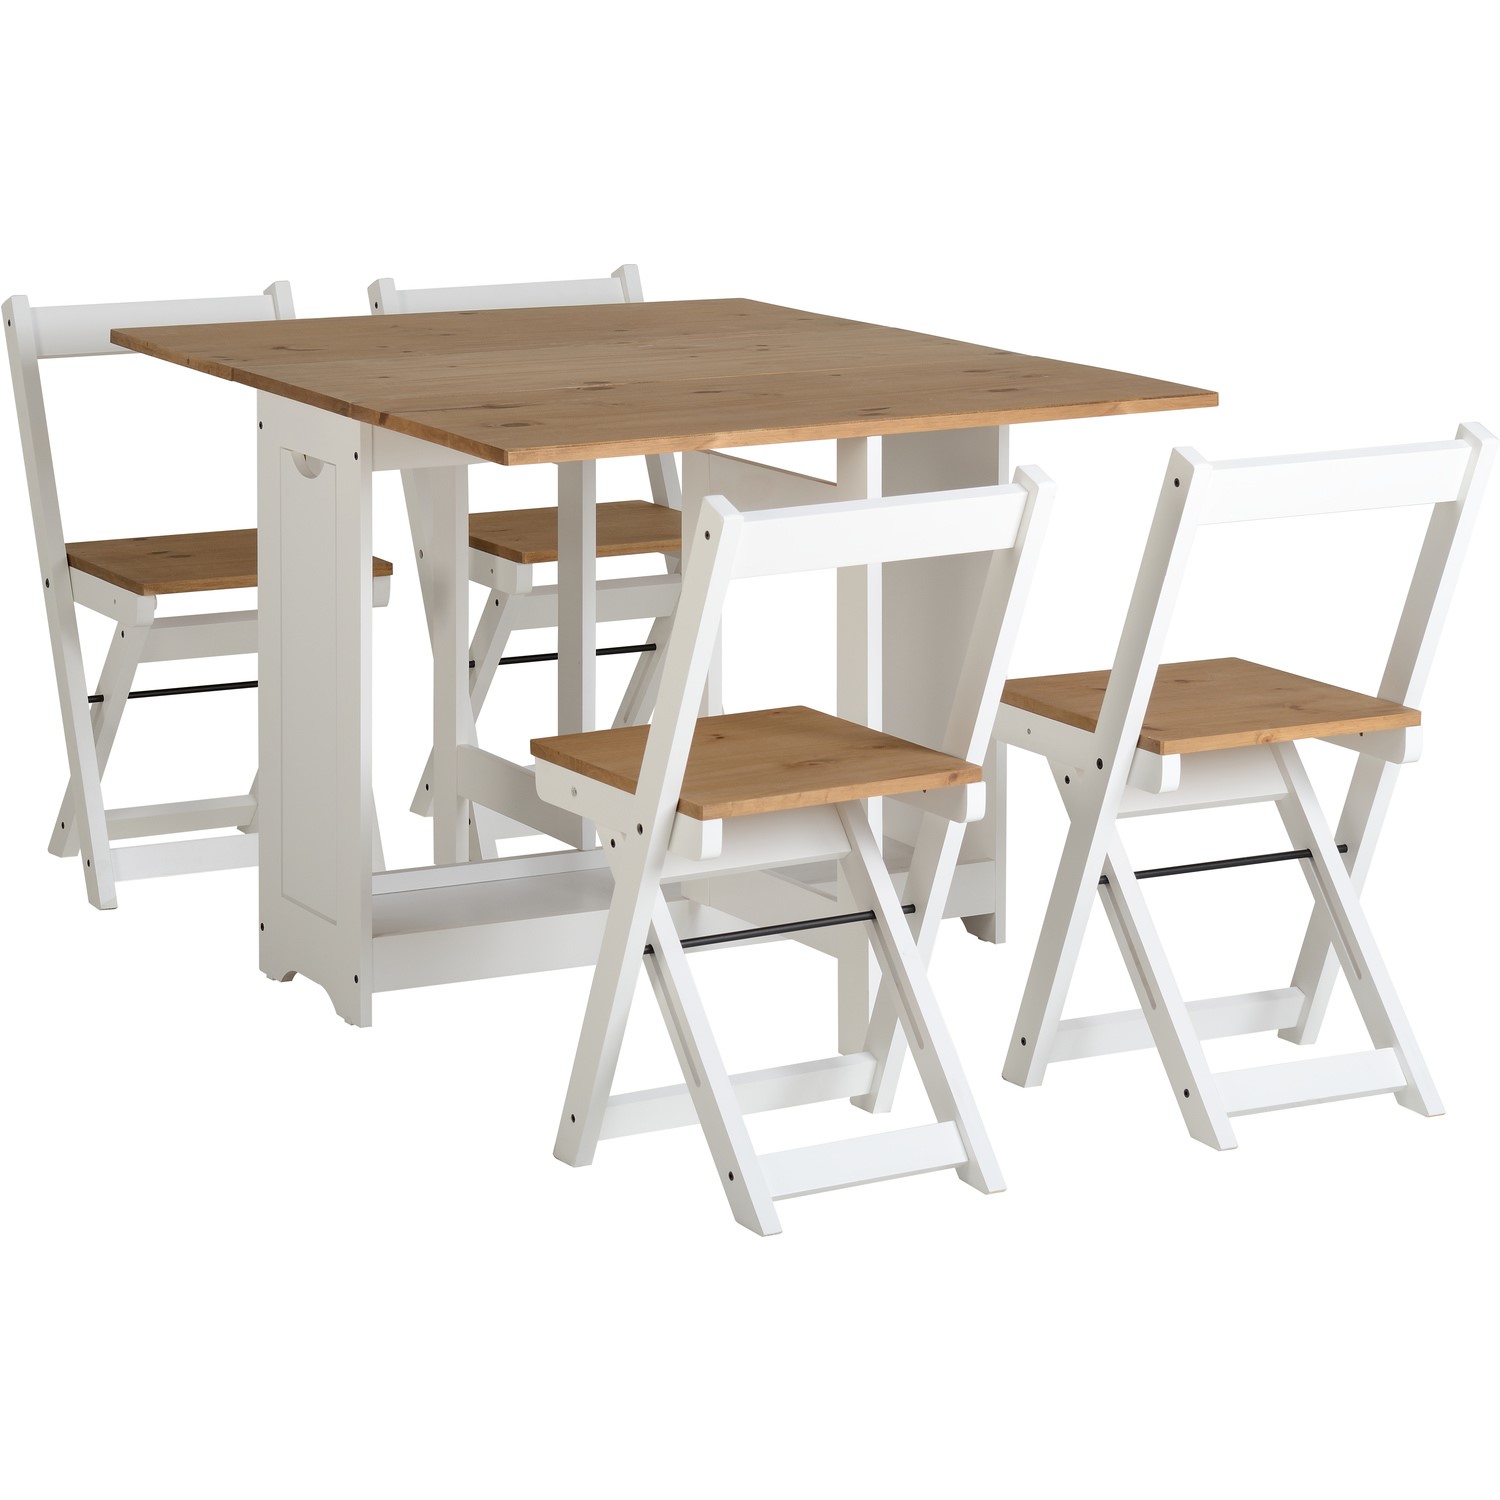 seconique santos butterfly folding dining set in grey & pine with 4 dining chairs